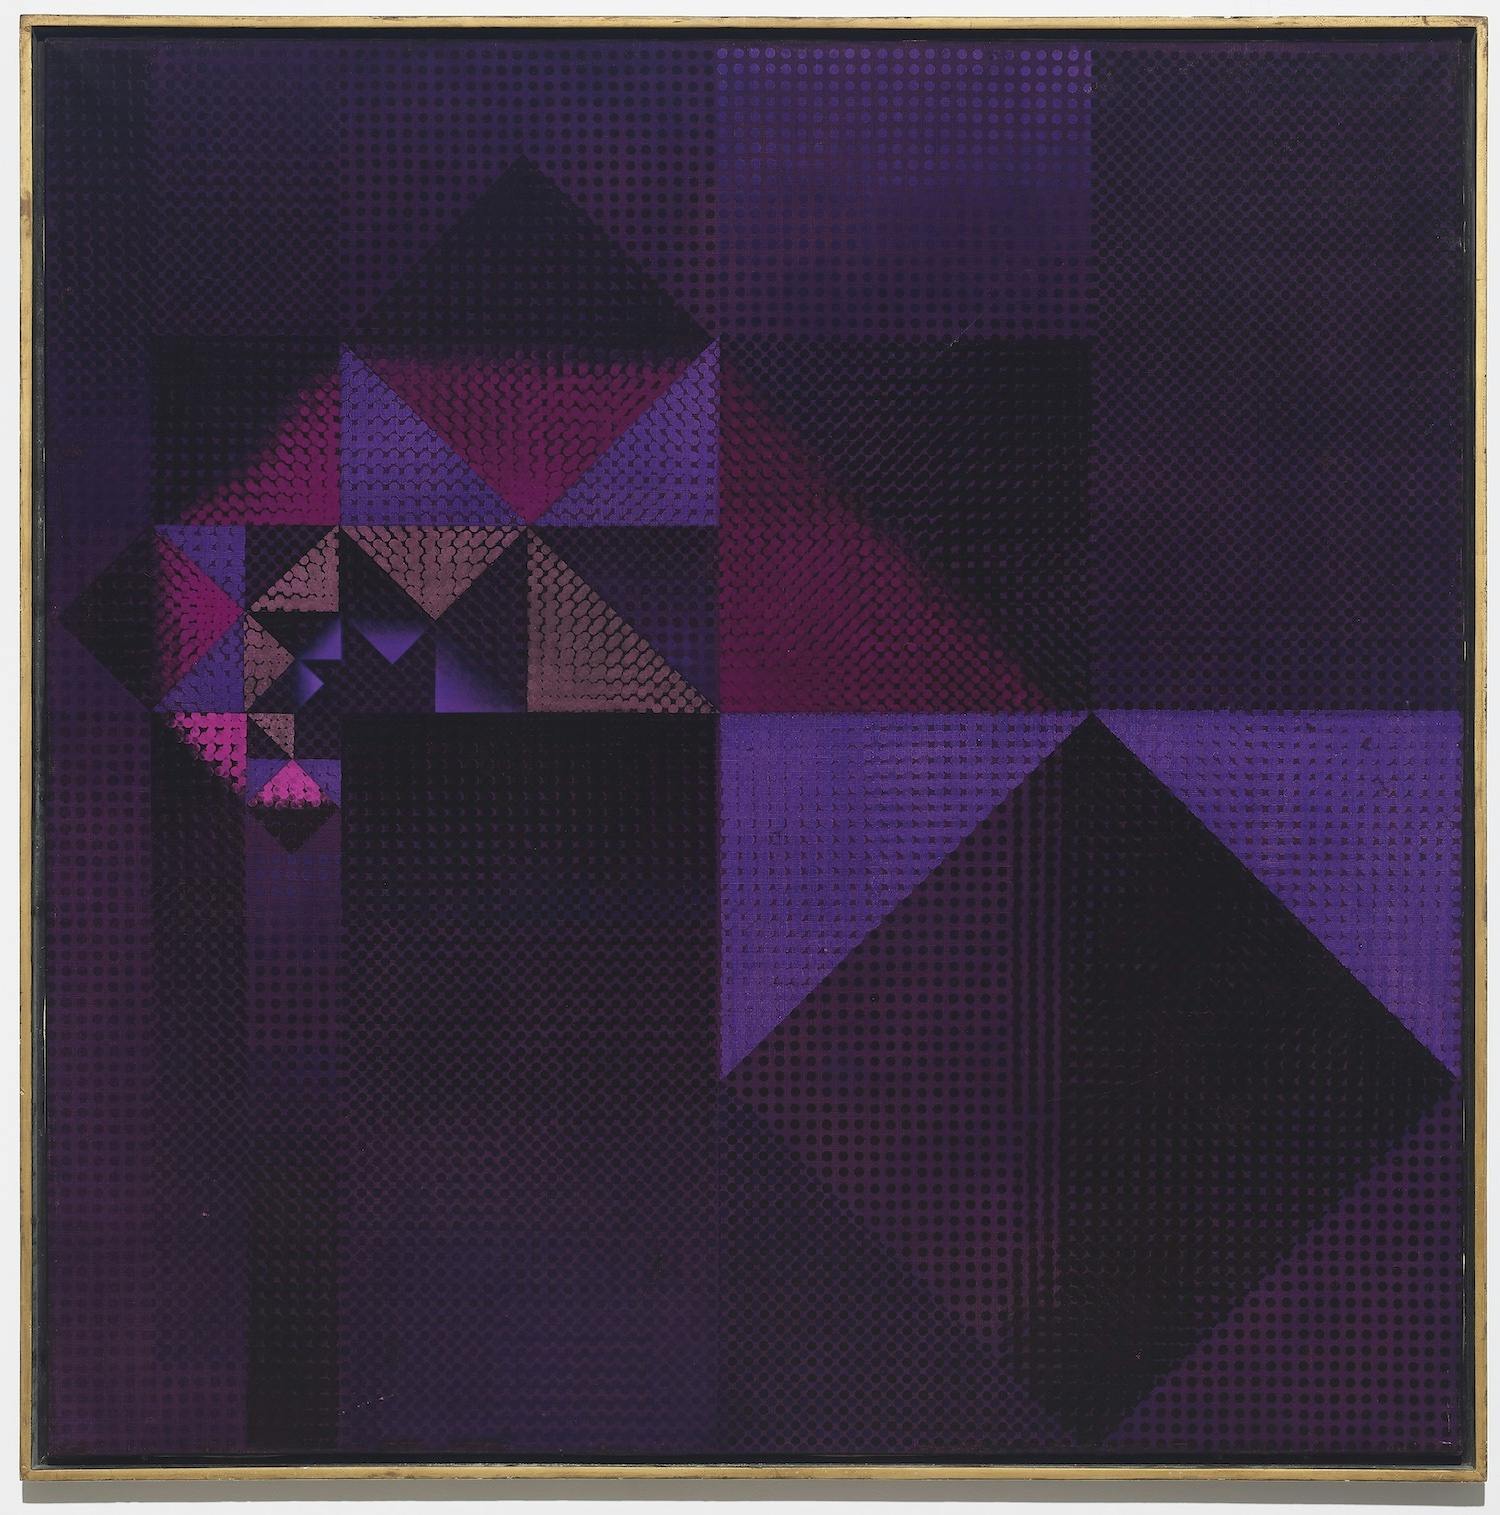 Painting by José Antonio Fernández-Muro of a spiral composed of geometric shapes of a purple hue.